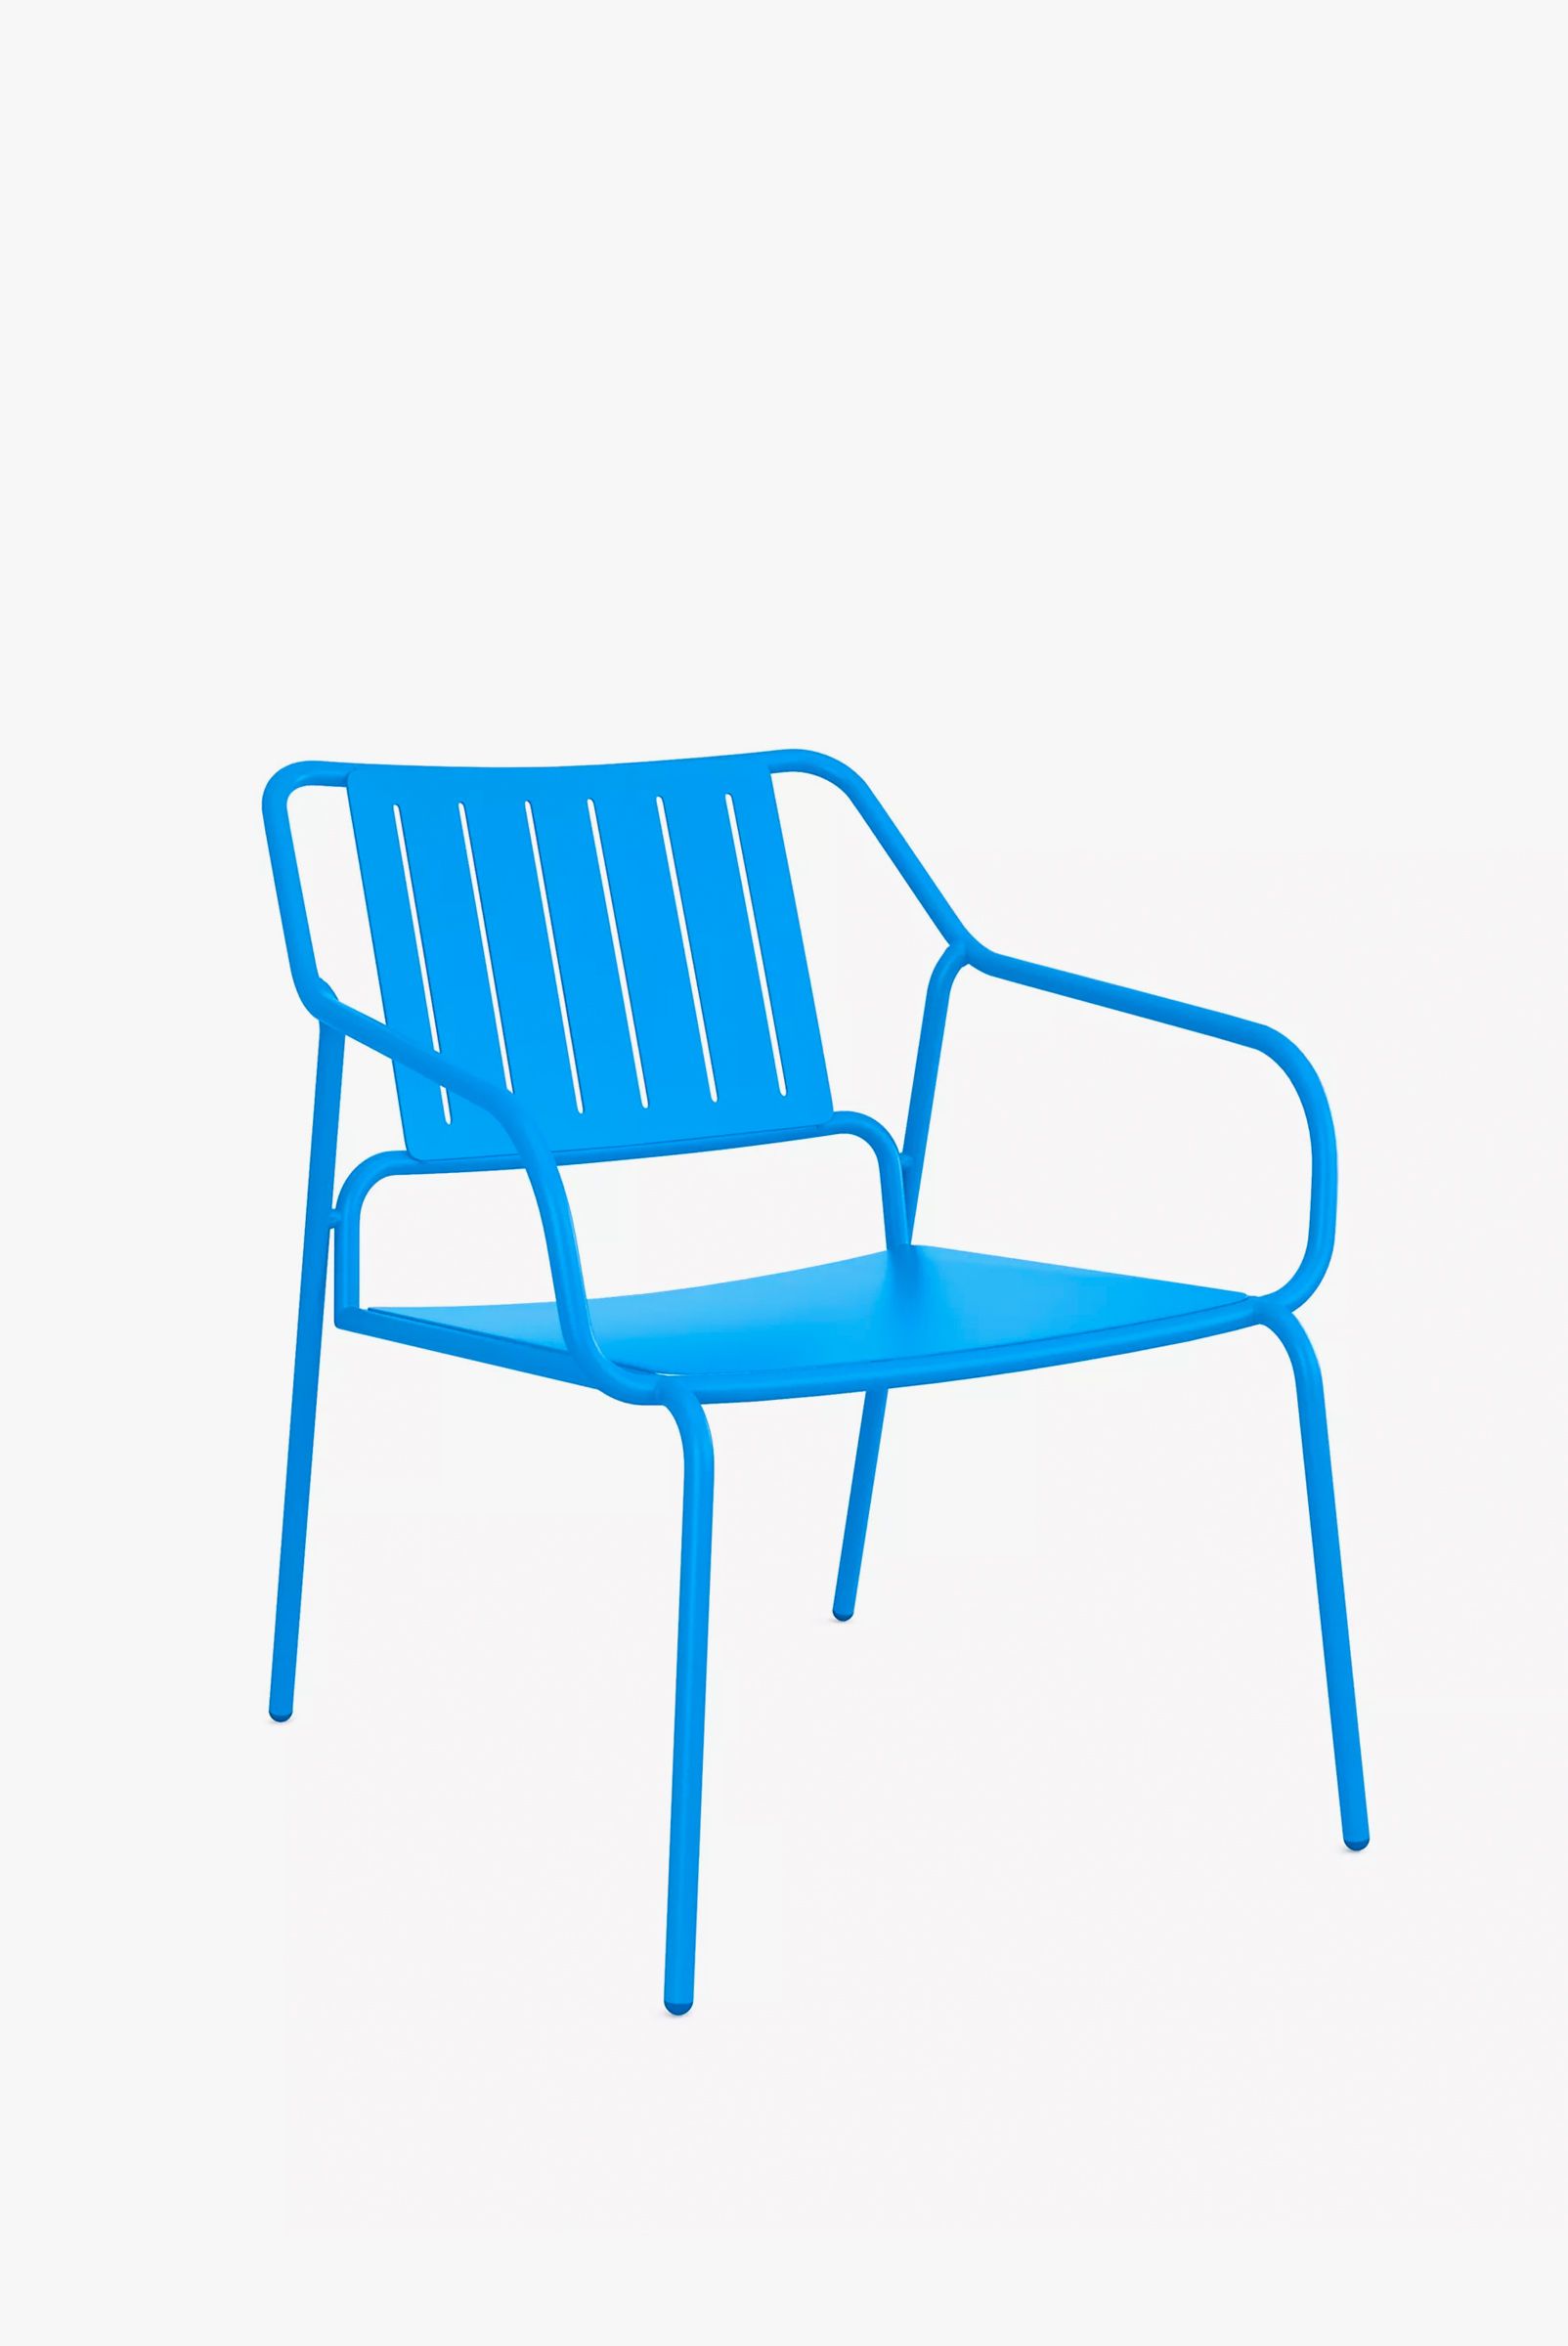 ANYDAY John Lewis & Partners Brights Metal Garden Lounge Chair, Directoire Blue, £47.20